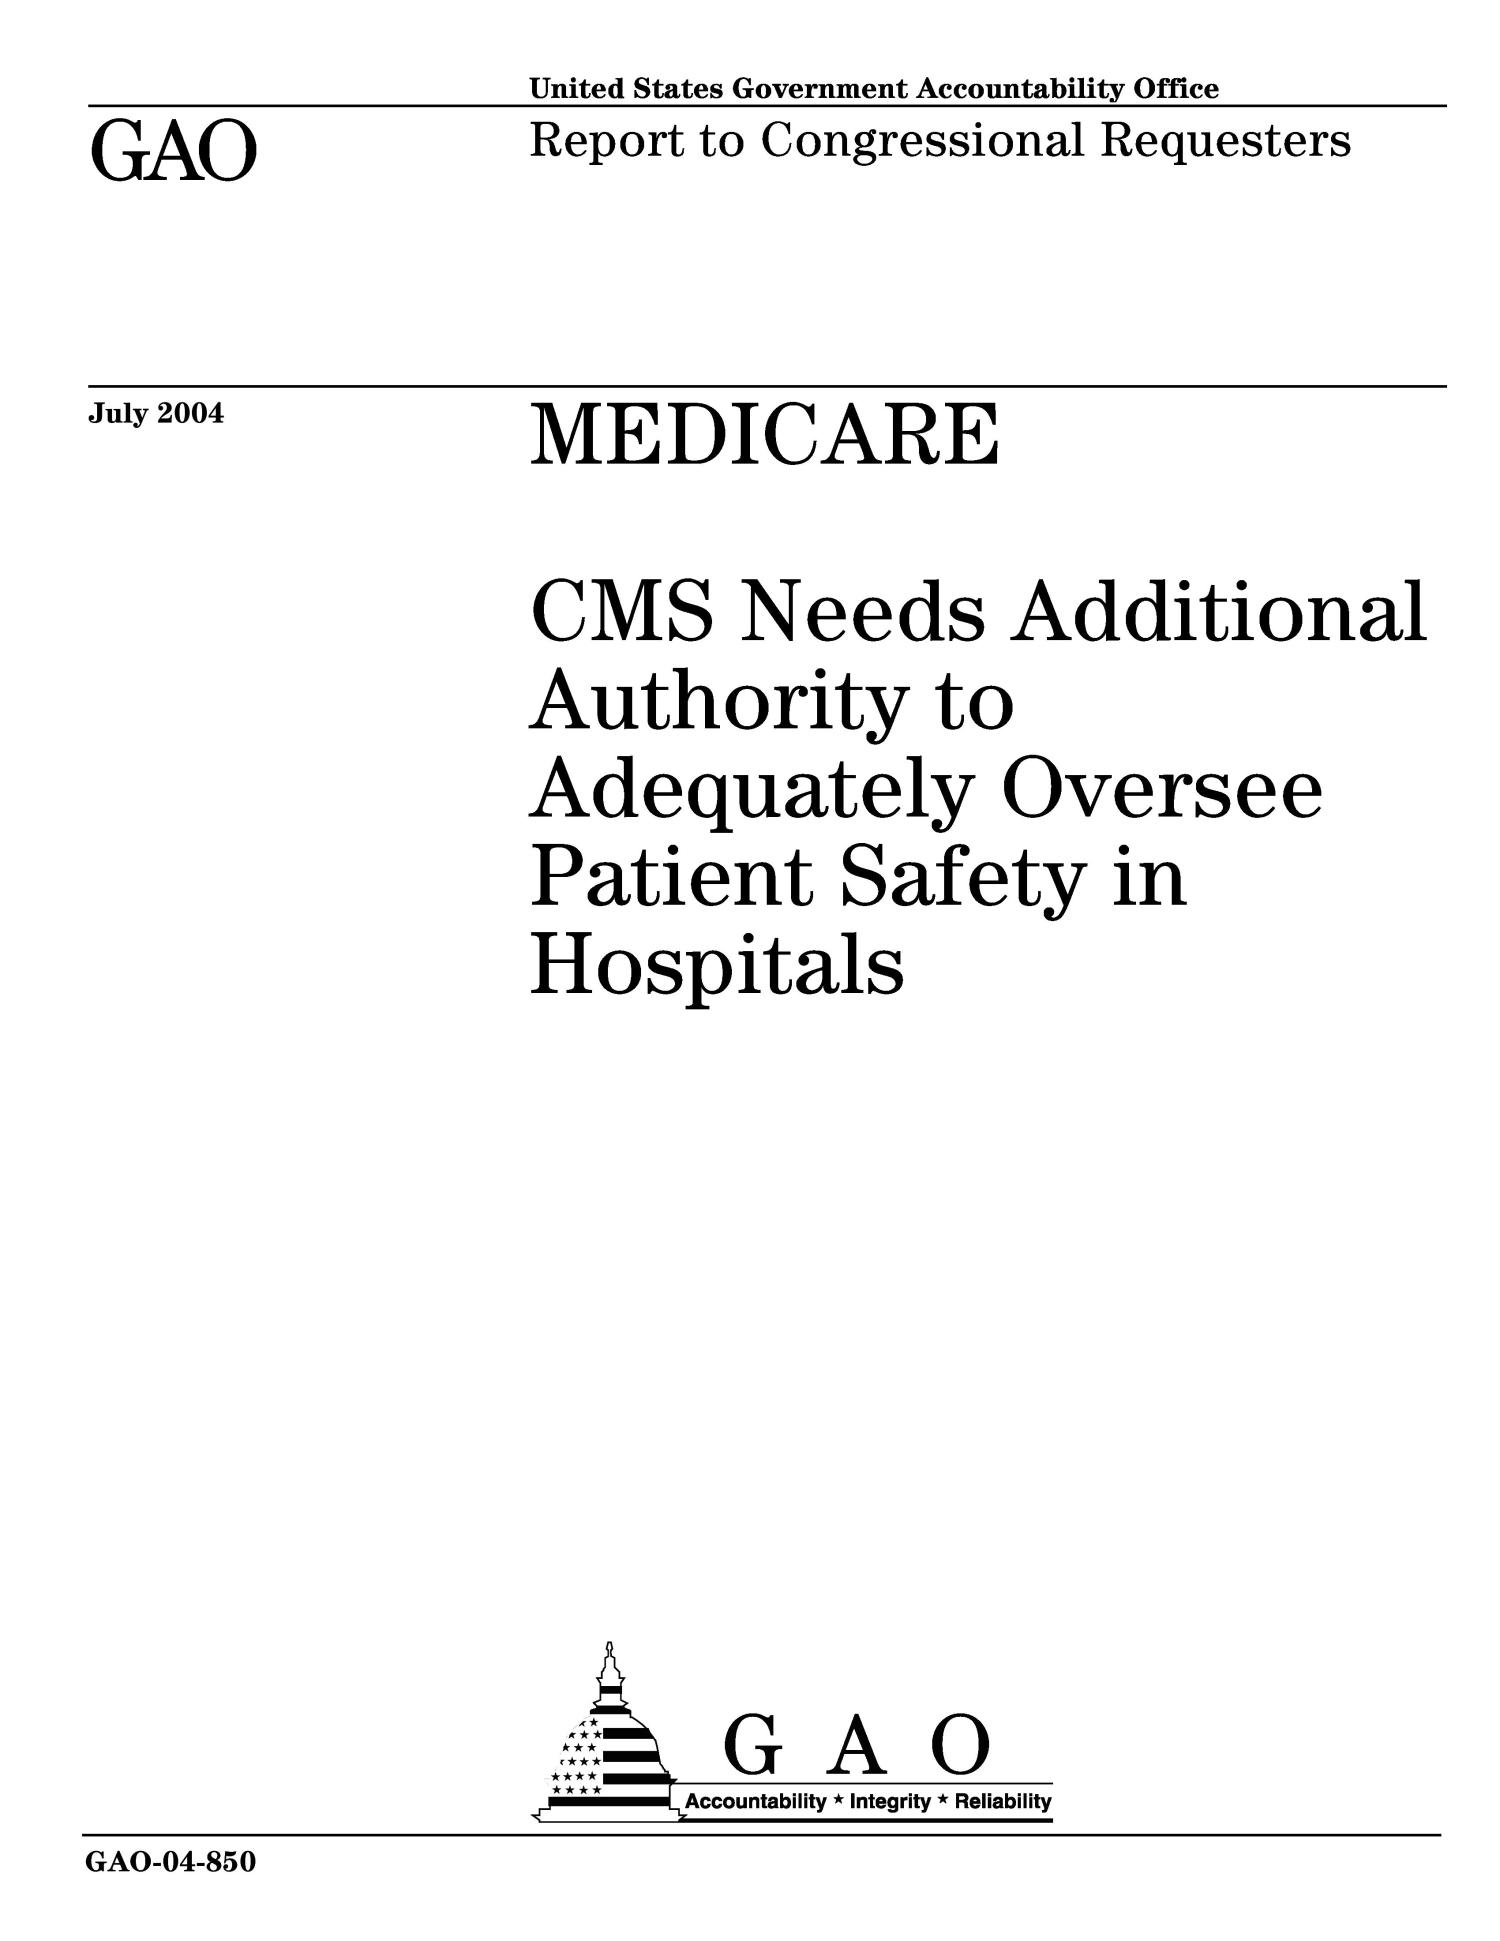 Medicare: CMS Needs Additional Authority to Adequately Oversee Patient Safety in Hospitals
                                                
                                                    [Sequence #]: 1 of 58
                                                